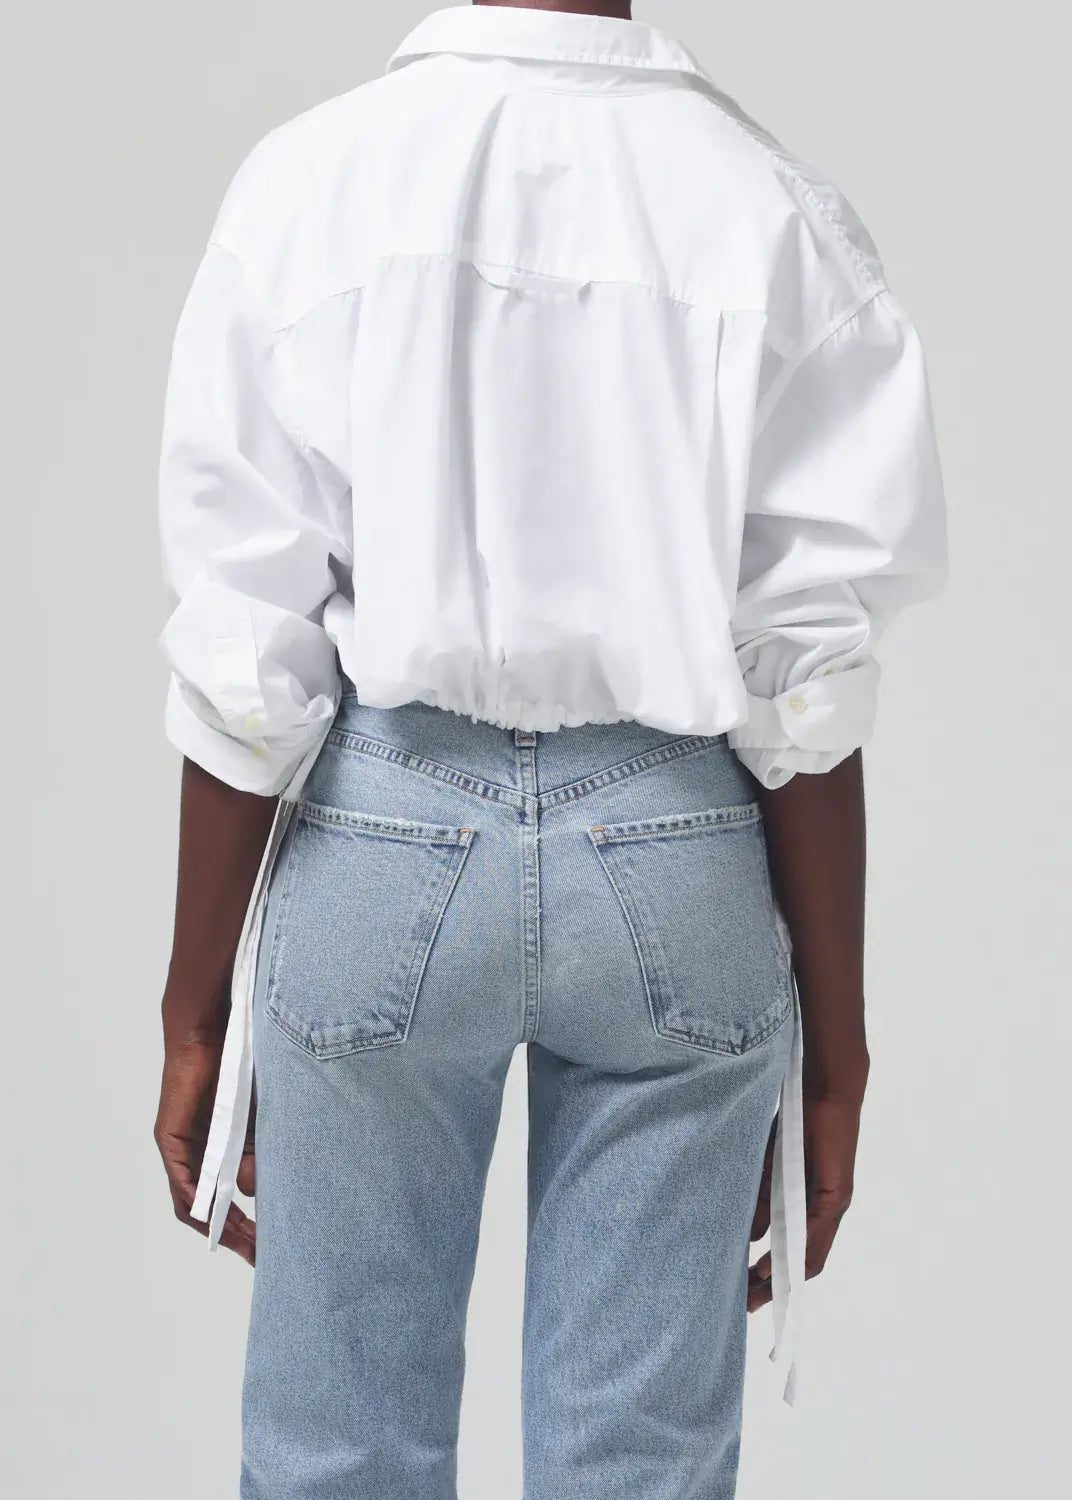 Citizens of Humanity Alexandra Top in White from The New Trend 